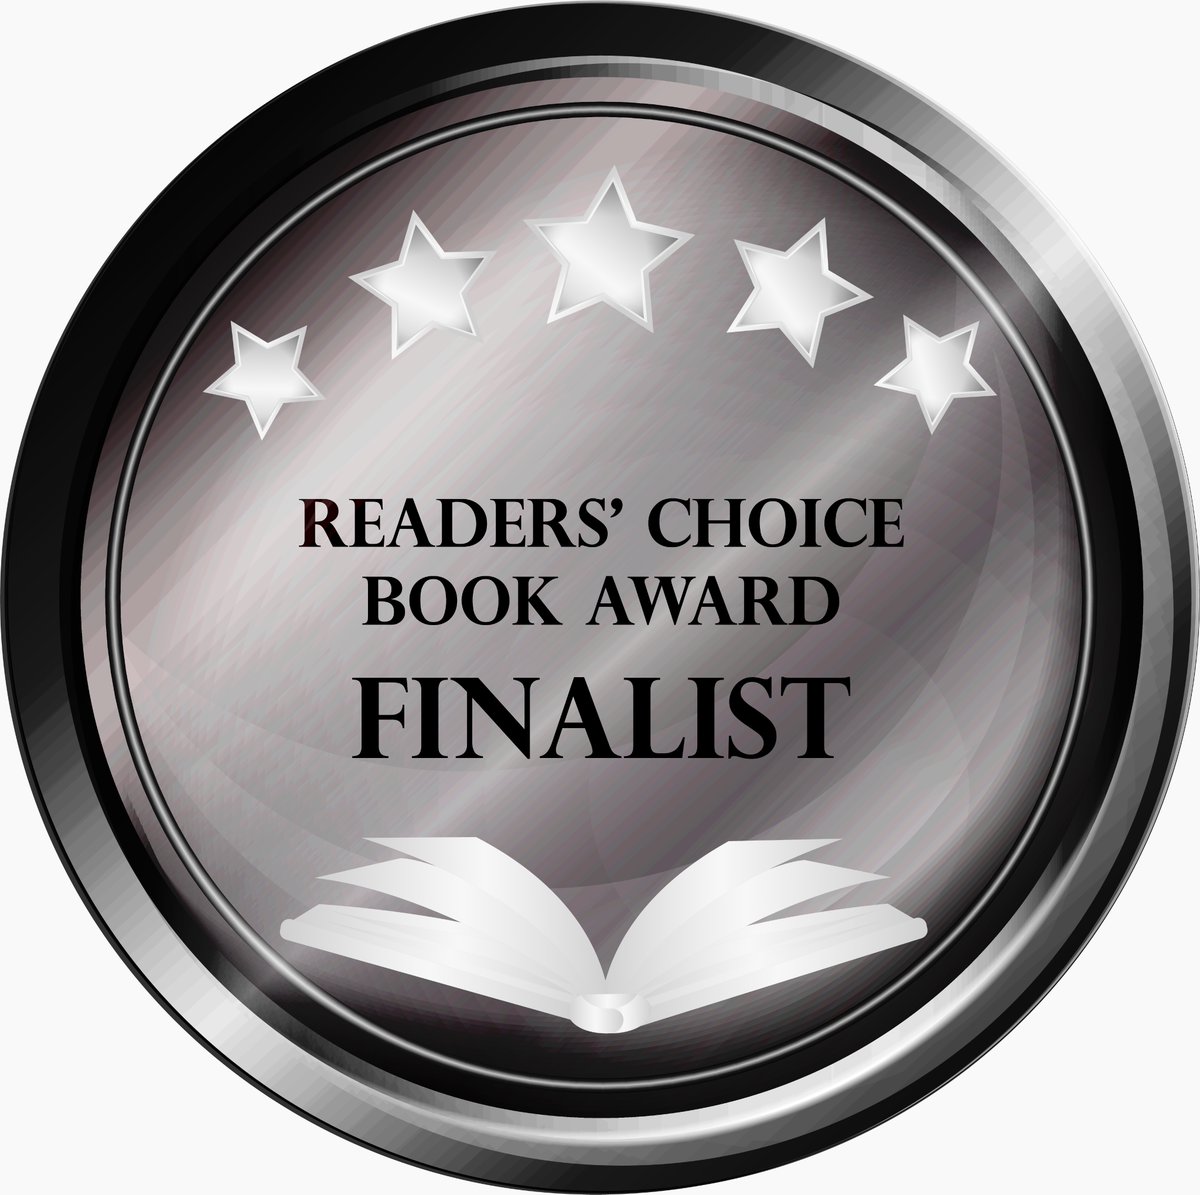 BREAKING NEWS! The Secret Doors of Cannondale was just announced as a Readers’ Choice Book Award FINALIST! Winner to be announced late next month. Keep the good news coming! 🌟🌟🌟🌟🌟 #bookstagram #thesecretdoorsofcannondale, #stephaniebrickbooks, #cannondalebooktrilogy, #kidlit